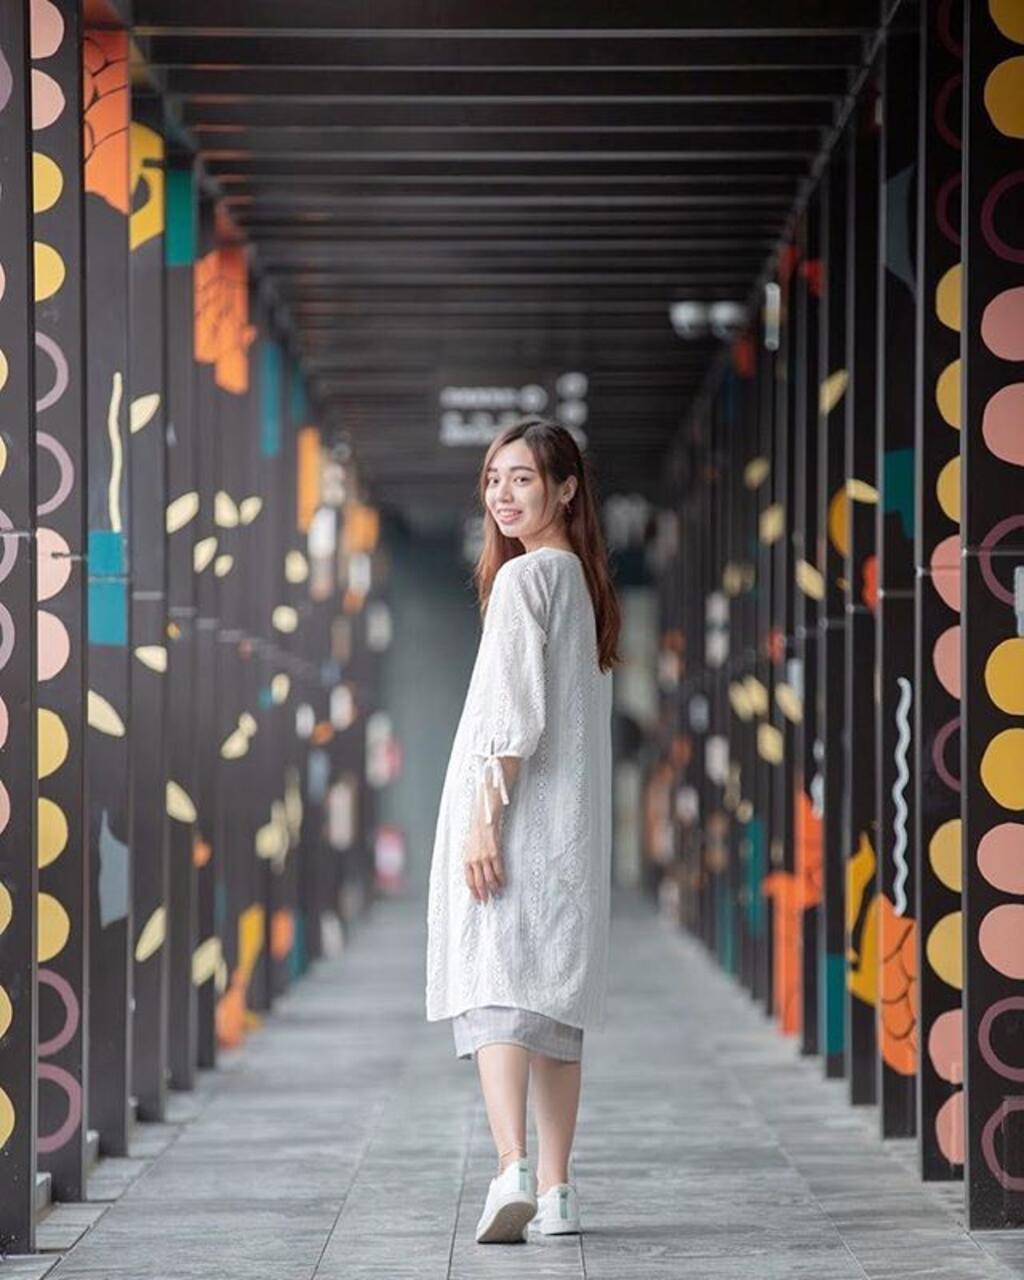 Most trendy! The Classic Photo Spots in Taichung